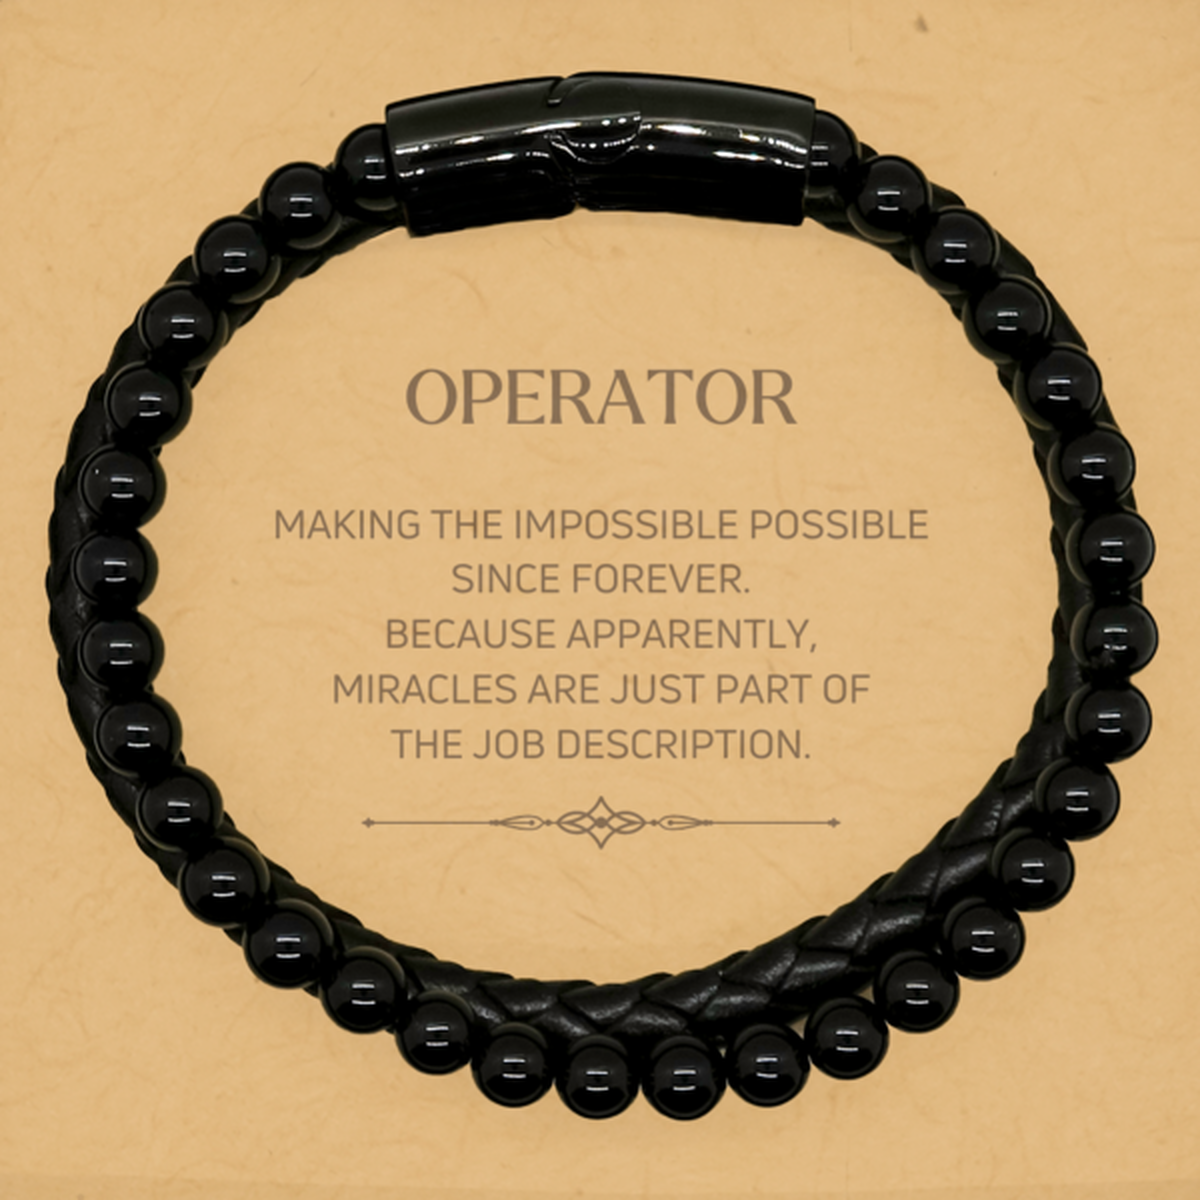 Funny Operator Gifts, Miracles are just part of the job description, Inspirational Birthday Stone Leather Bracelets For Operator, Men, Women, Coworkers, Friends, Boss